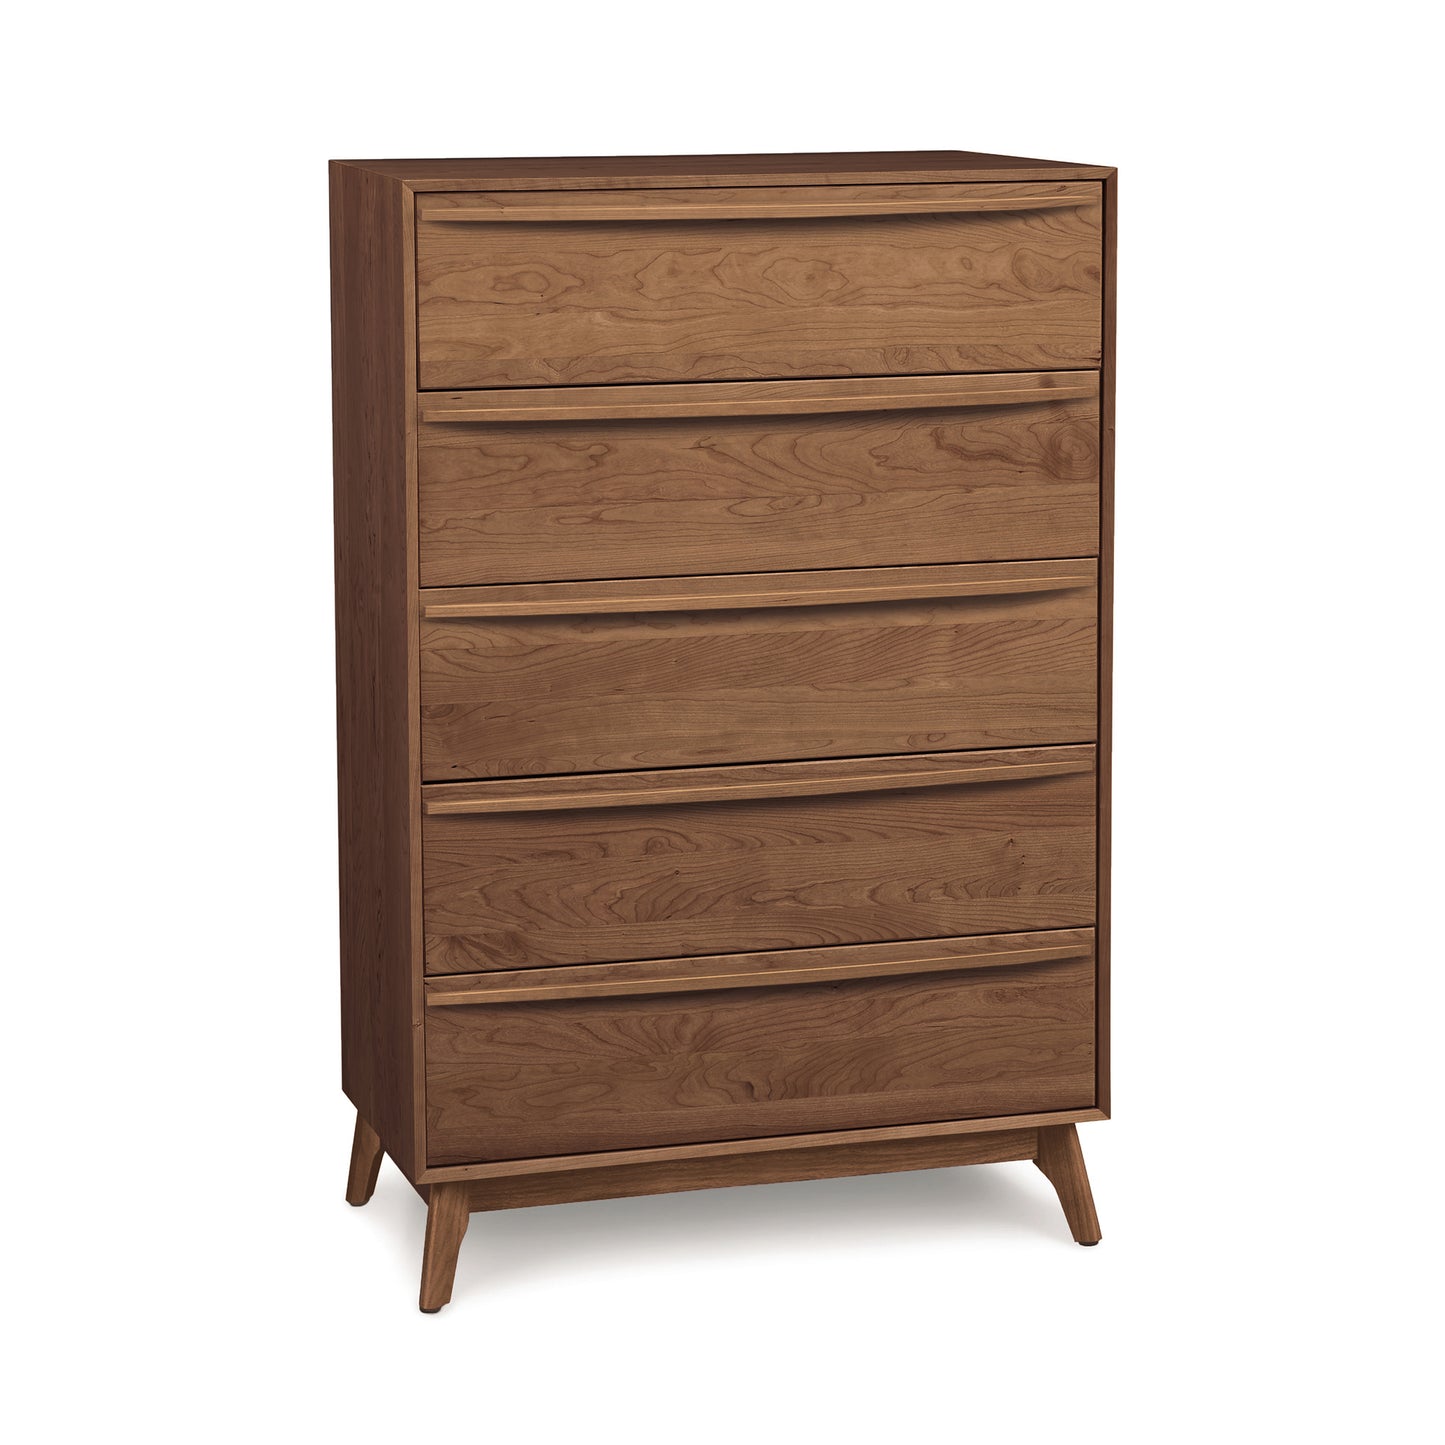 A mid-century modern style wooden Catalina 5-Drawer Wide Chest by Copeland Furniture on a white background.